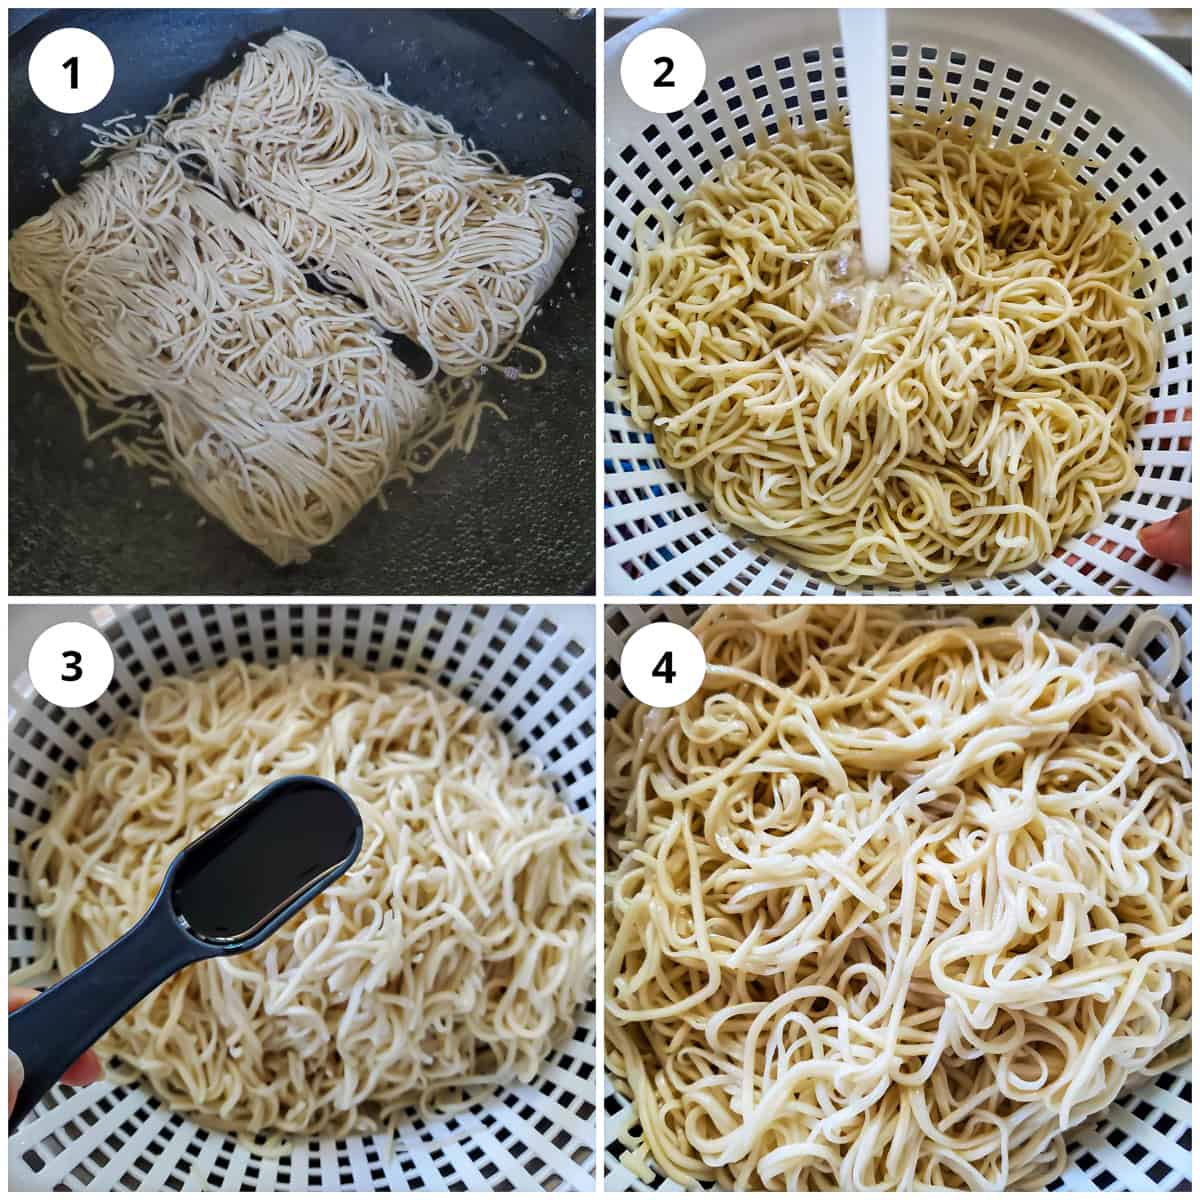 Step wise pic of boiling, straining noodles and coating with oil